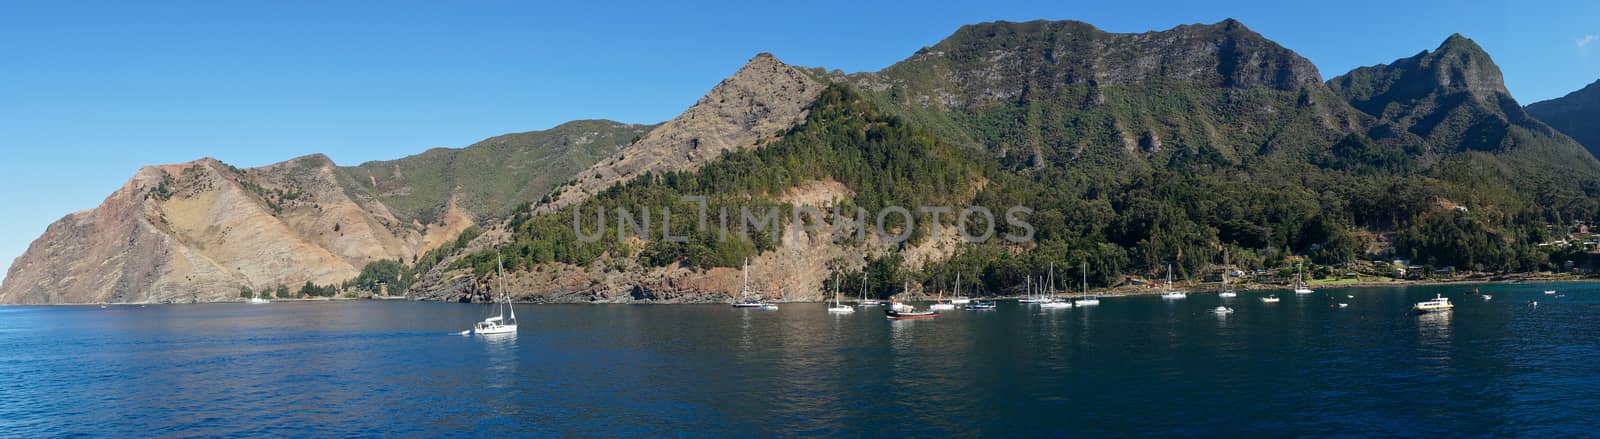 Cumberland Bay on Robinson Crusoe Island, one of three main islands making up the Juan Fernandez Islands some 400 miles off the coast of Chile.